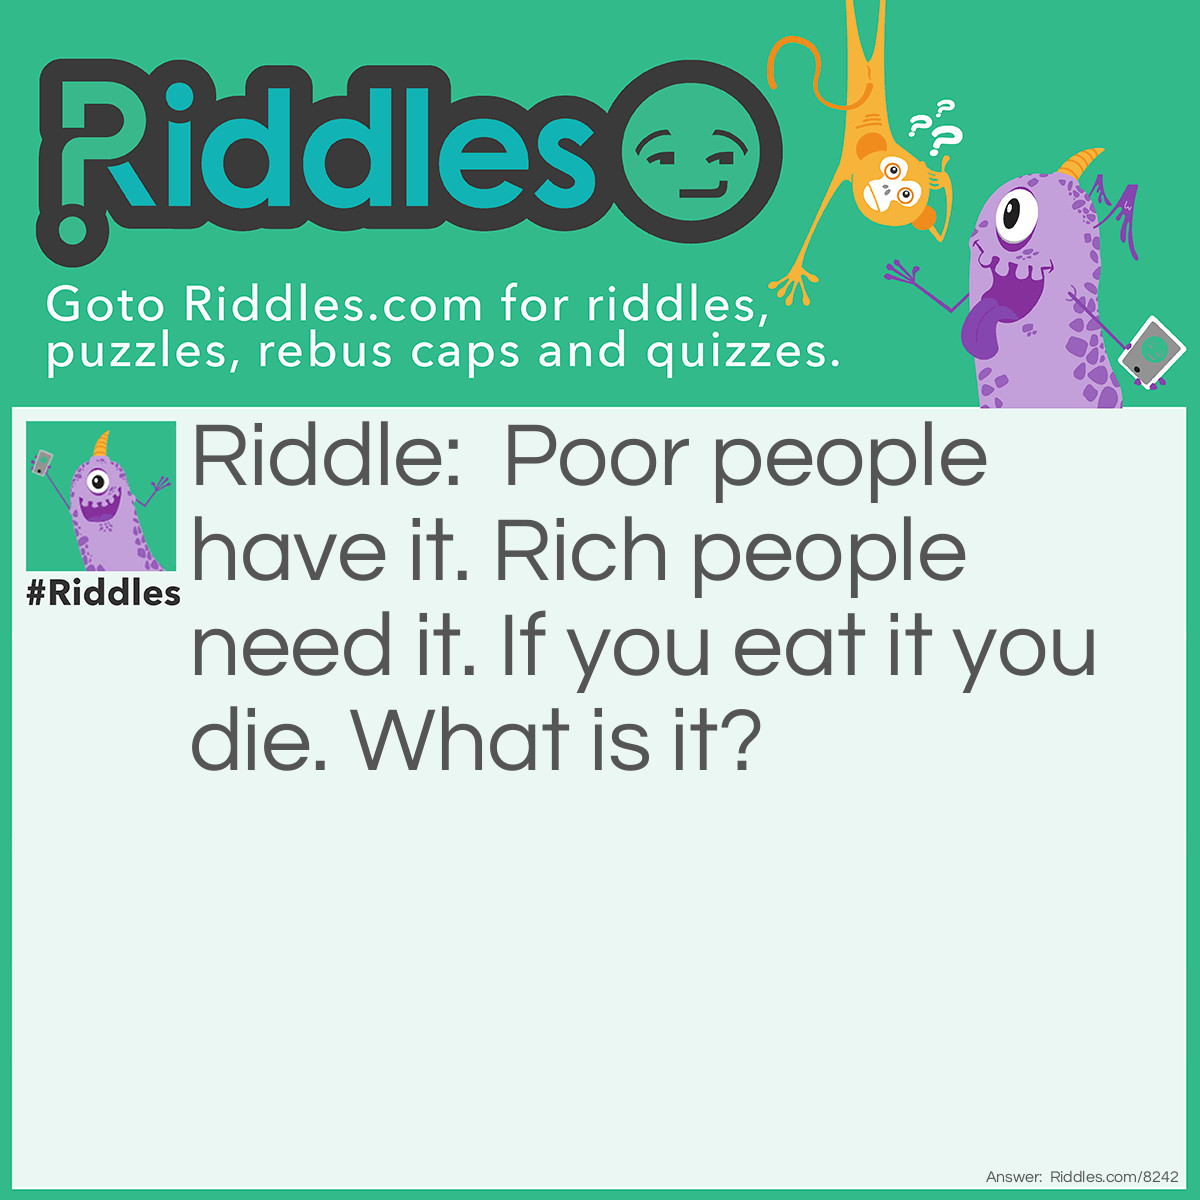 Riddle: Poor people have it. Rich people need it. If you eat it you die. What is it? Answer: Nothing.